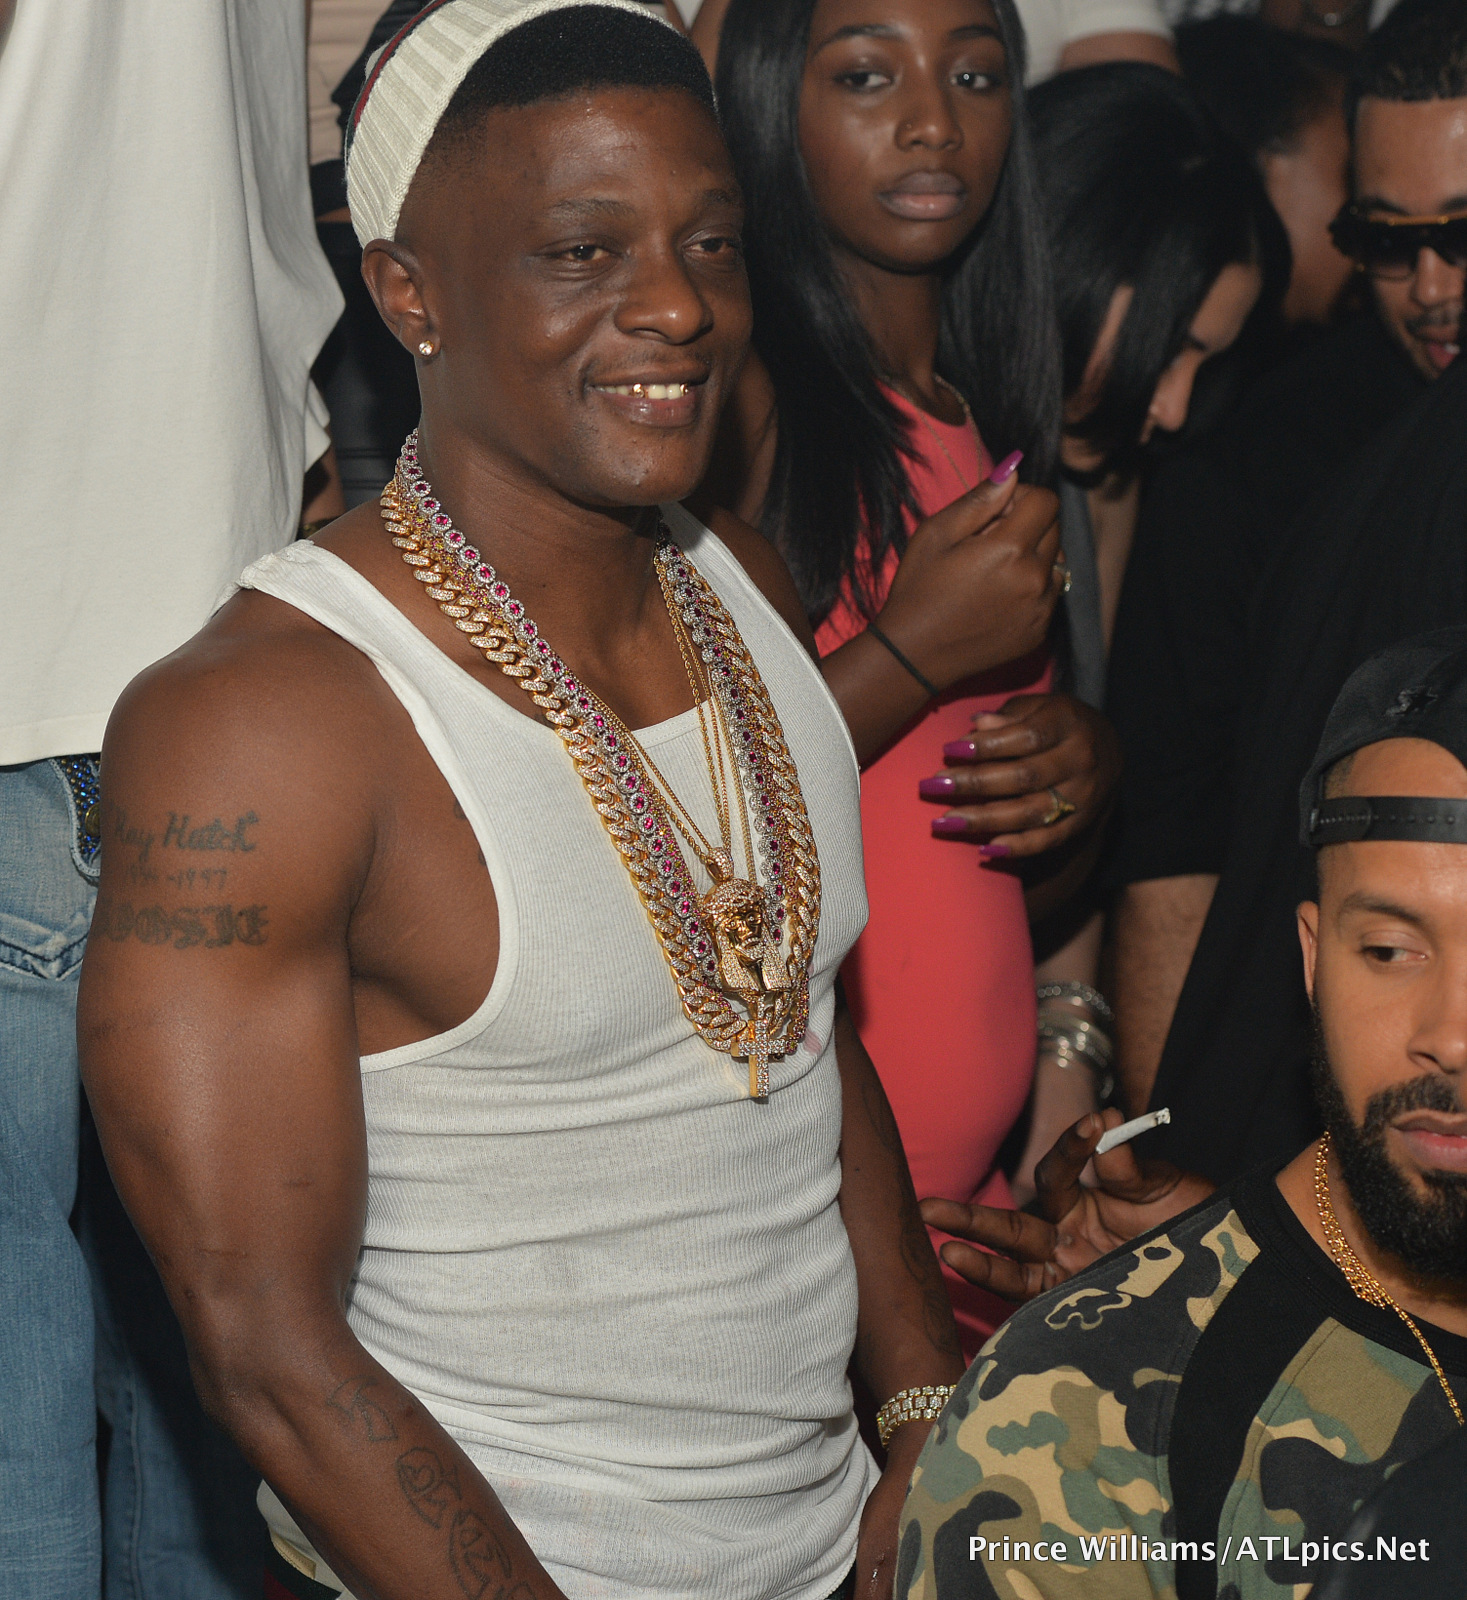 [Photos] Lil Boosie, Lil Wayne, J.Cole Caught Partying in ATL - Page 2 ...